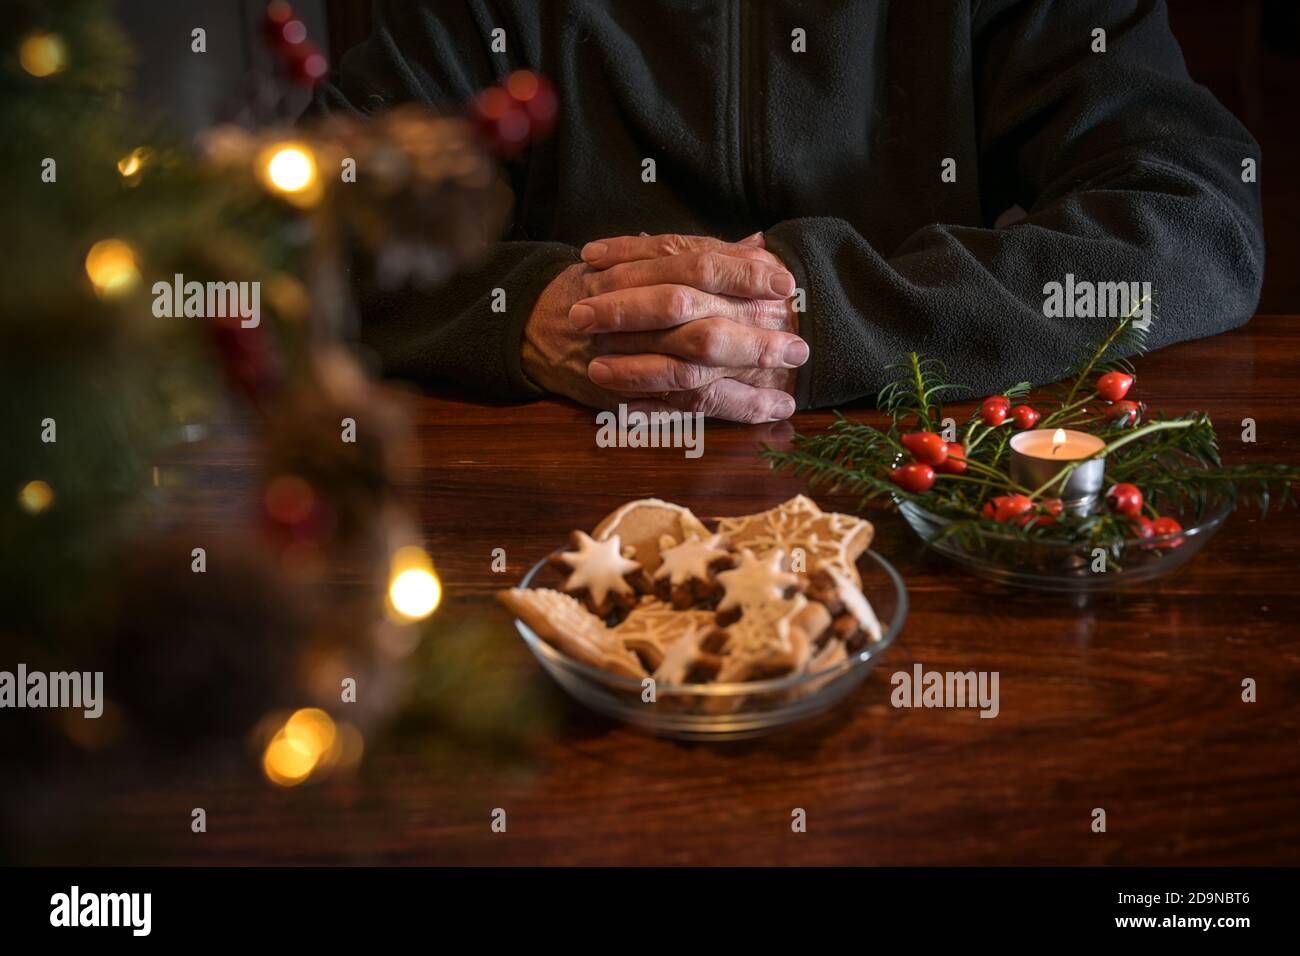 Praying hands of an elderly man on a table with Christmas cookies, burning candle and festive decoration, lonely holidays during the coronavirus pande Stock Photo